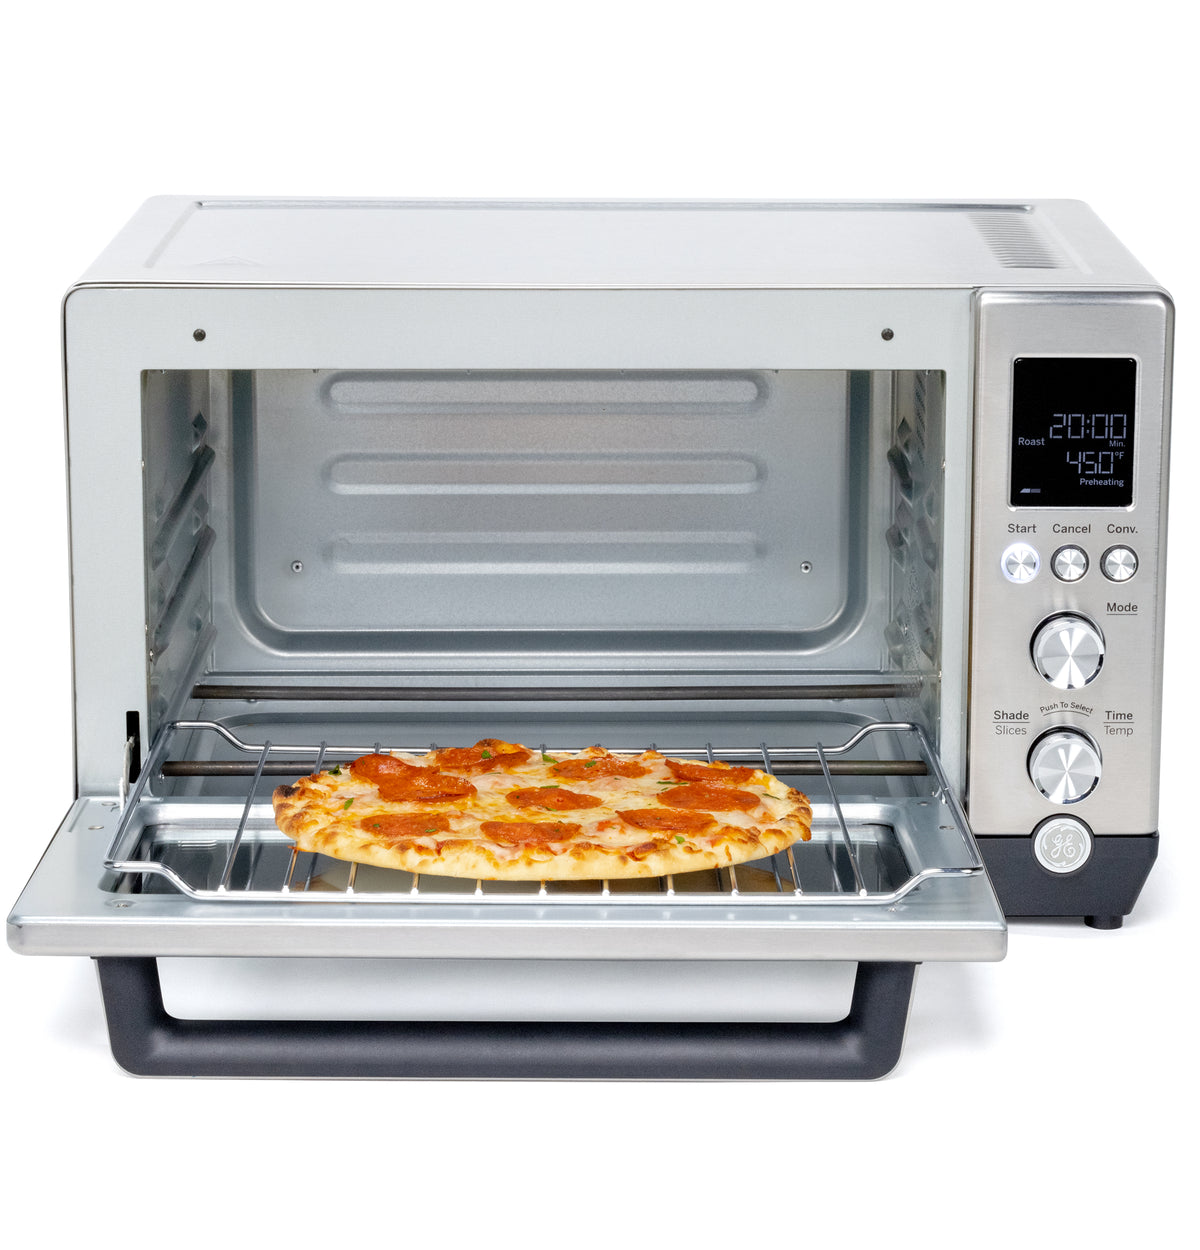 SAVE BIG on GE Calrod Convection Toaster Oven GE Appliances PR Online  Store. The most effective products are available at the lowest prices and  with outstanding service